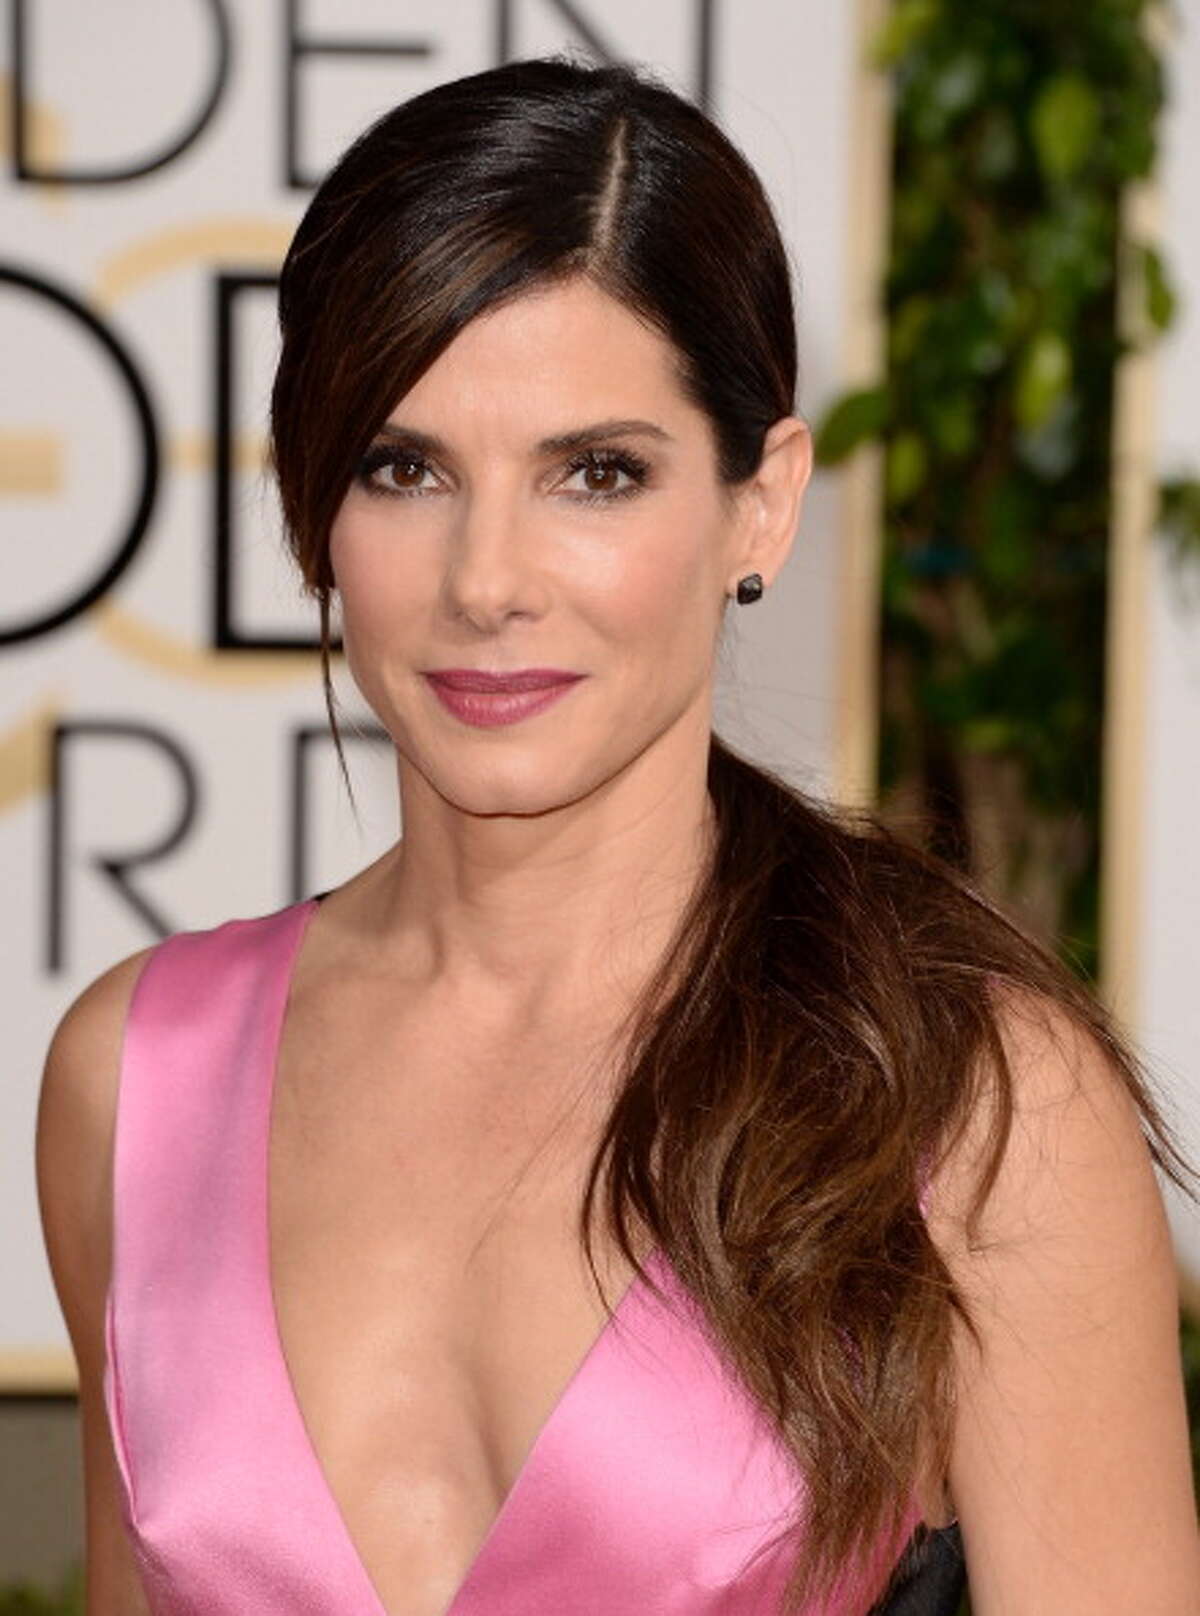 Actress Sandra Bullock attends the 71st Annual Golden Globe Awards held at The Beverly Hilton Hotel